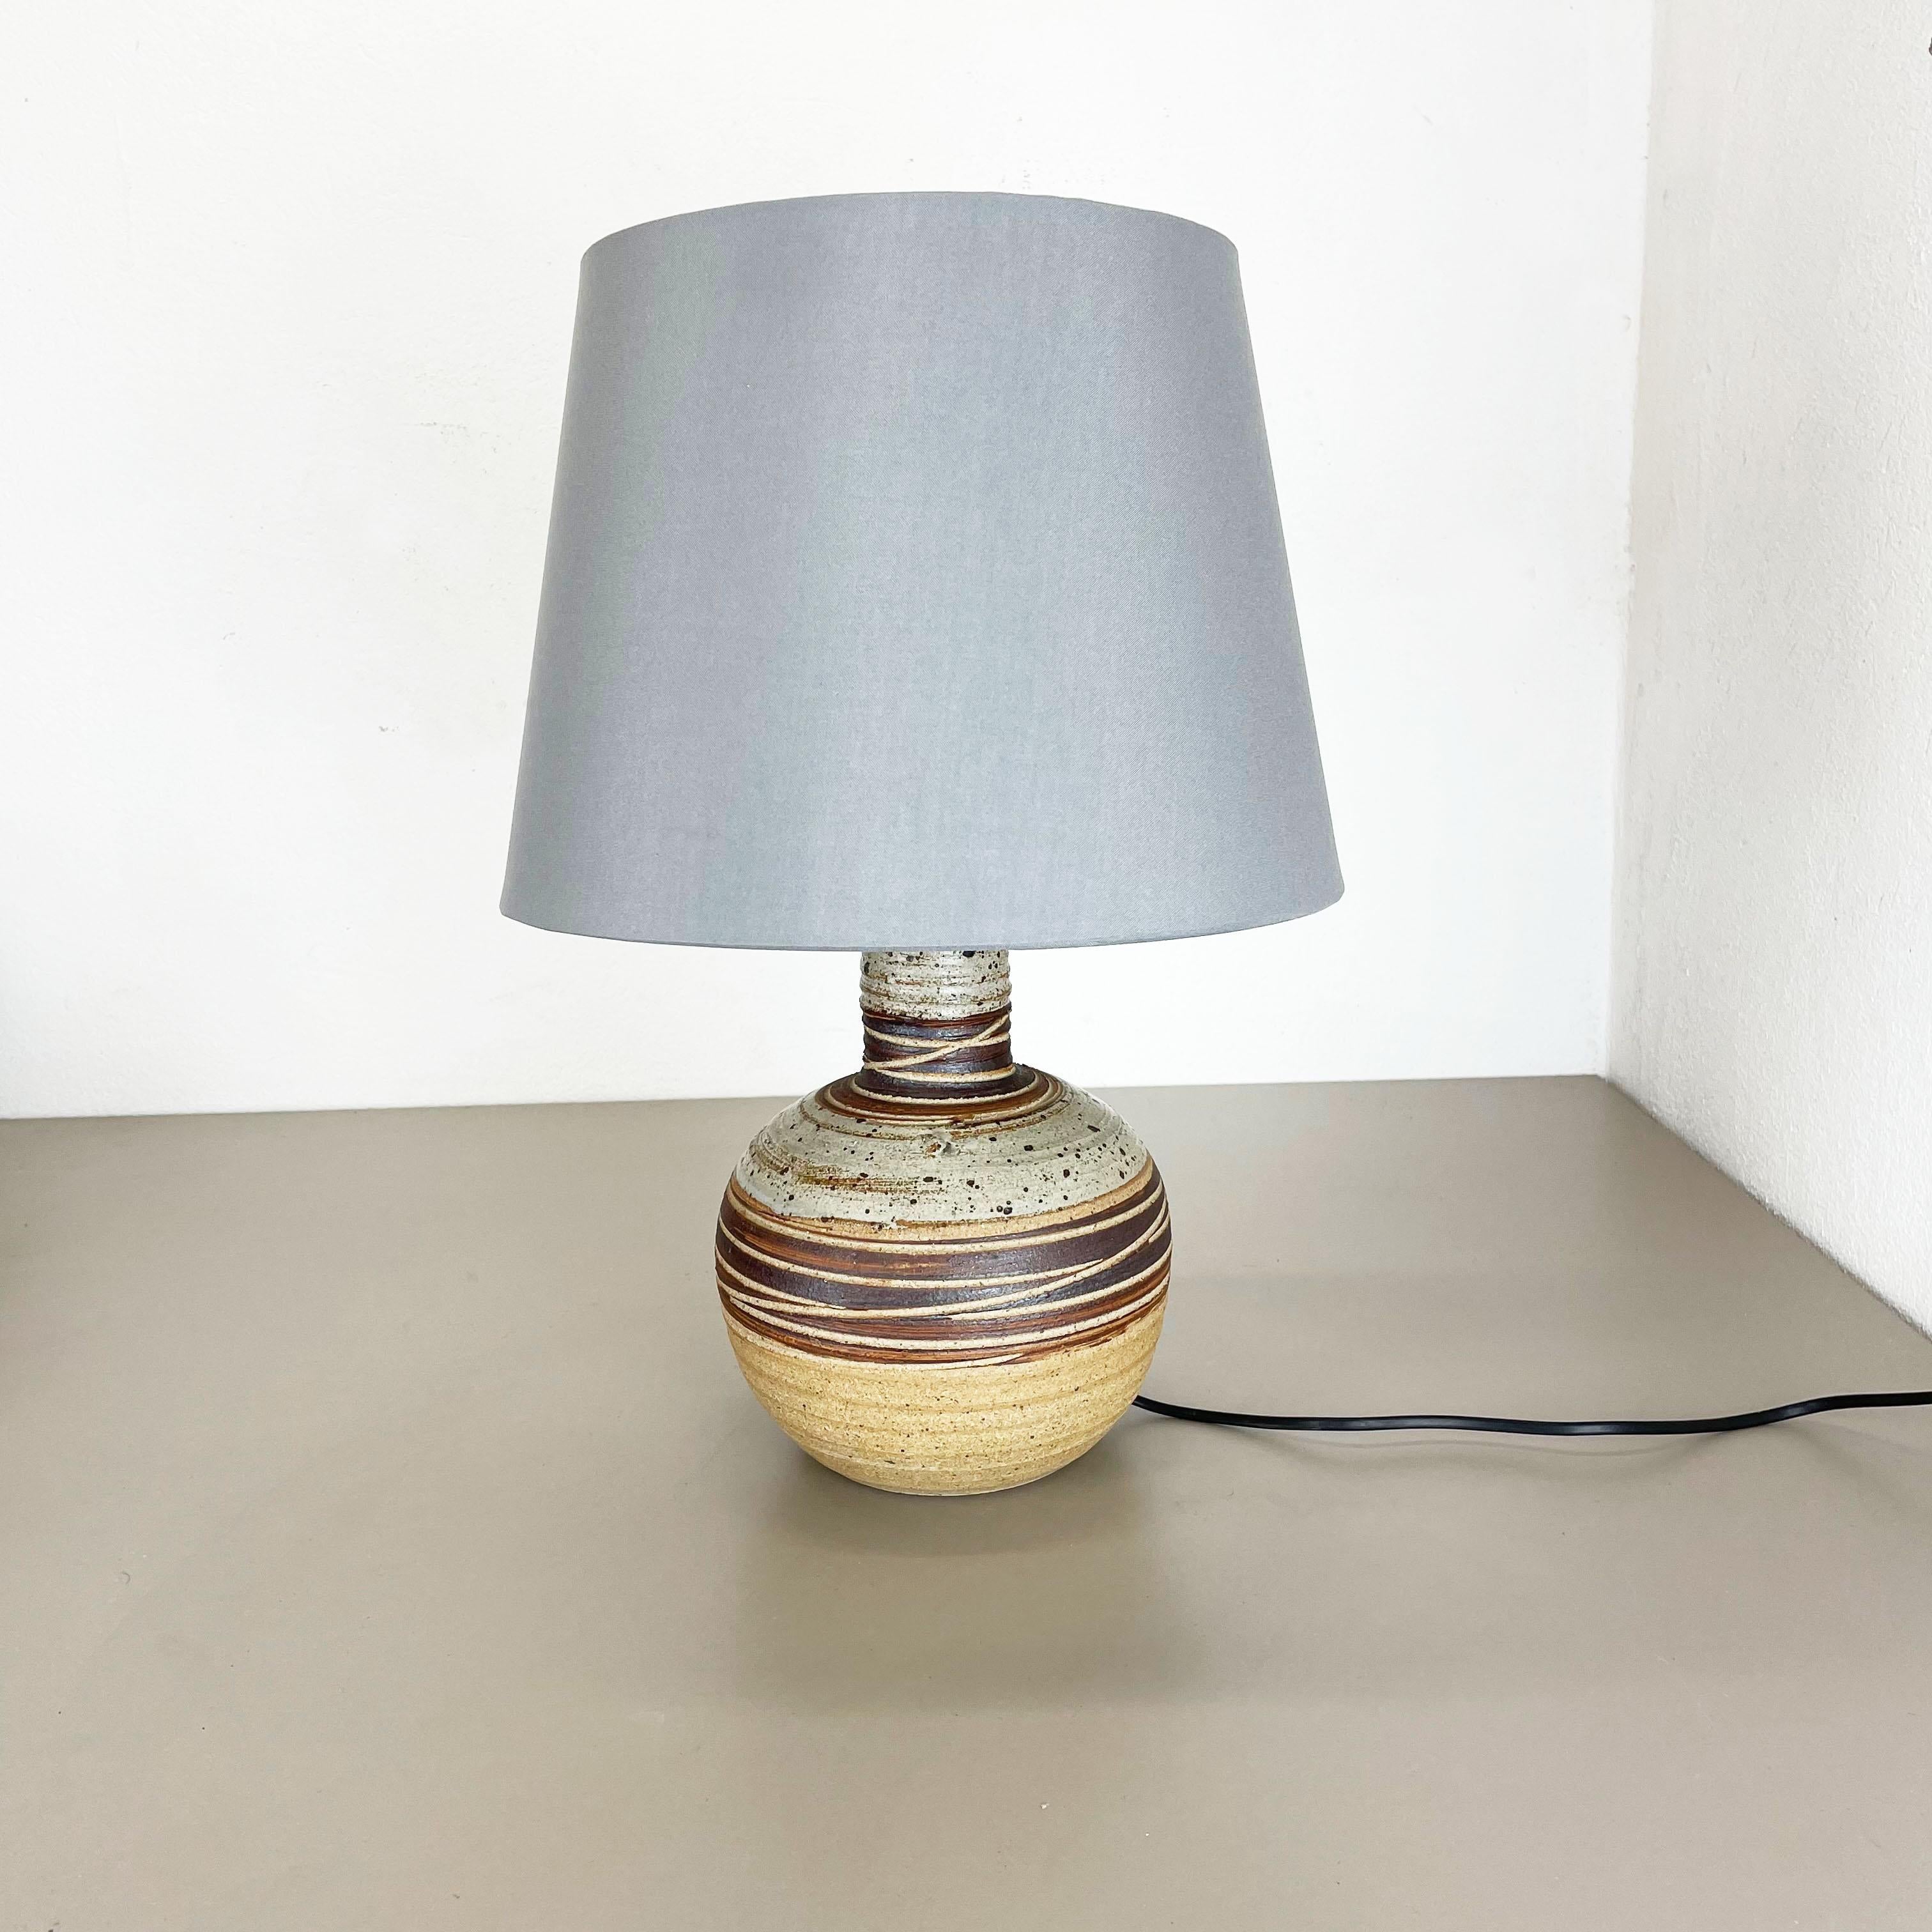 Article:

Ceramic table light base


Producer:

Tue Poulsen, Denmark




Decade:

1970s





This original vintage ceramic Pottery light base was designed and produced by Tue Poulsen in Denmark in the 1970s. It is made of solid